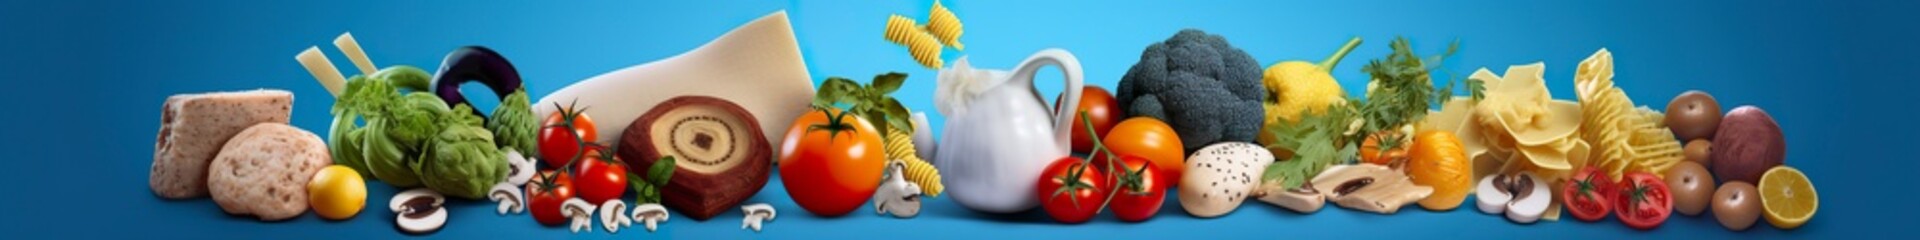 Web page banner of famous Italian food recipes on clean blue background.